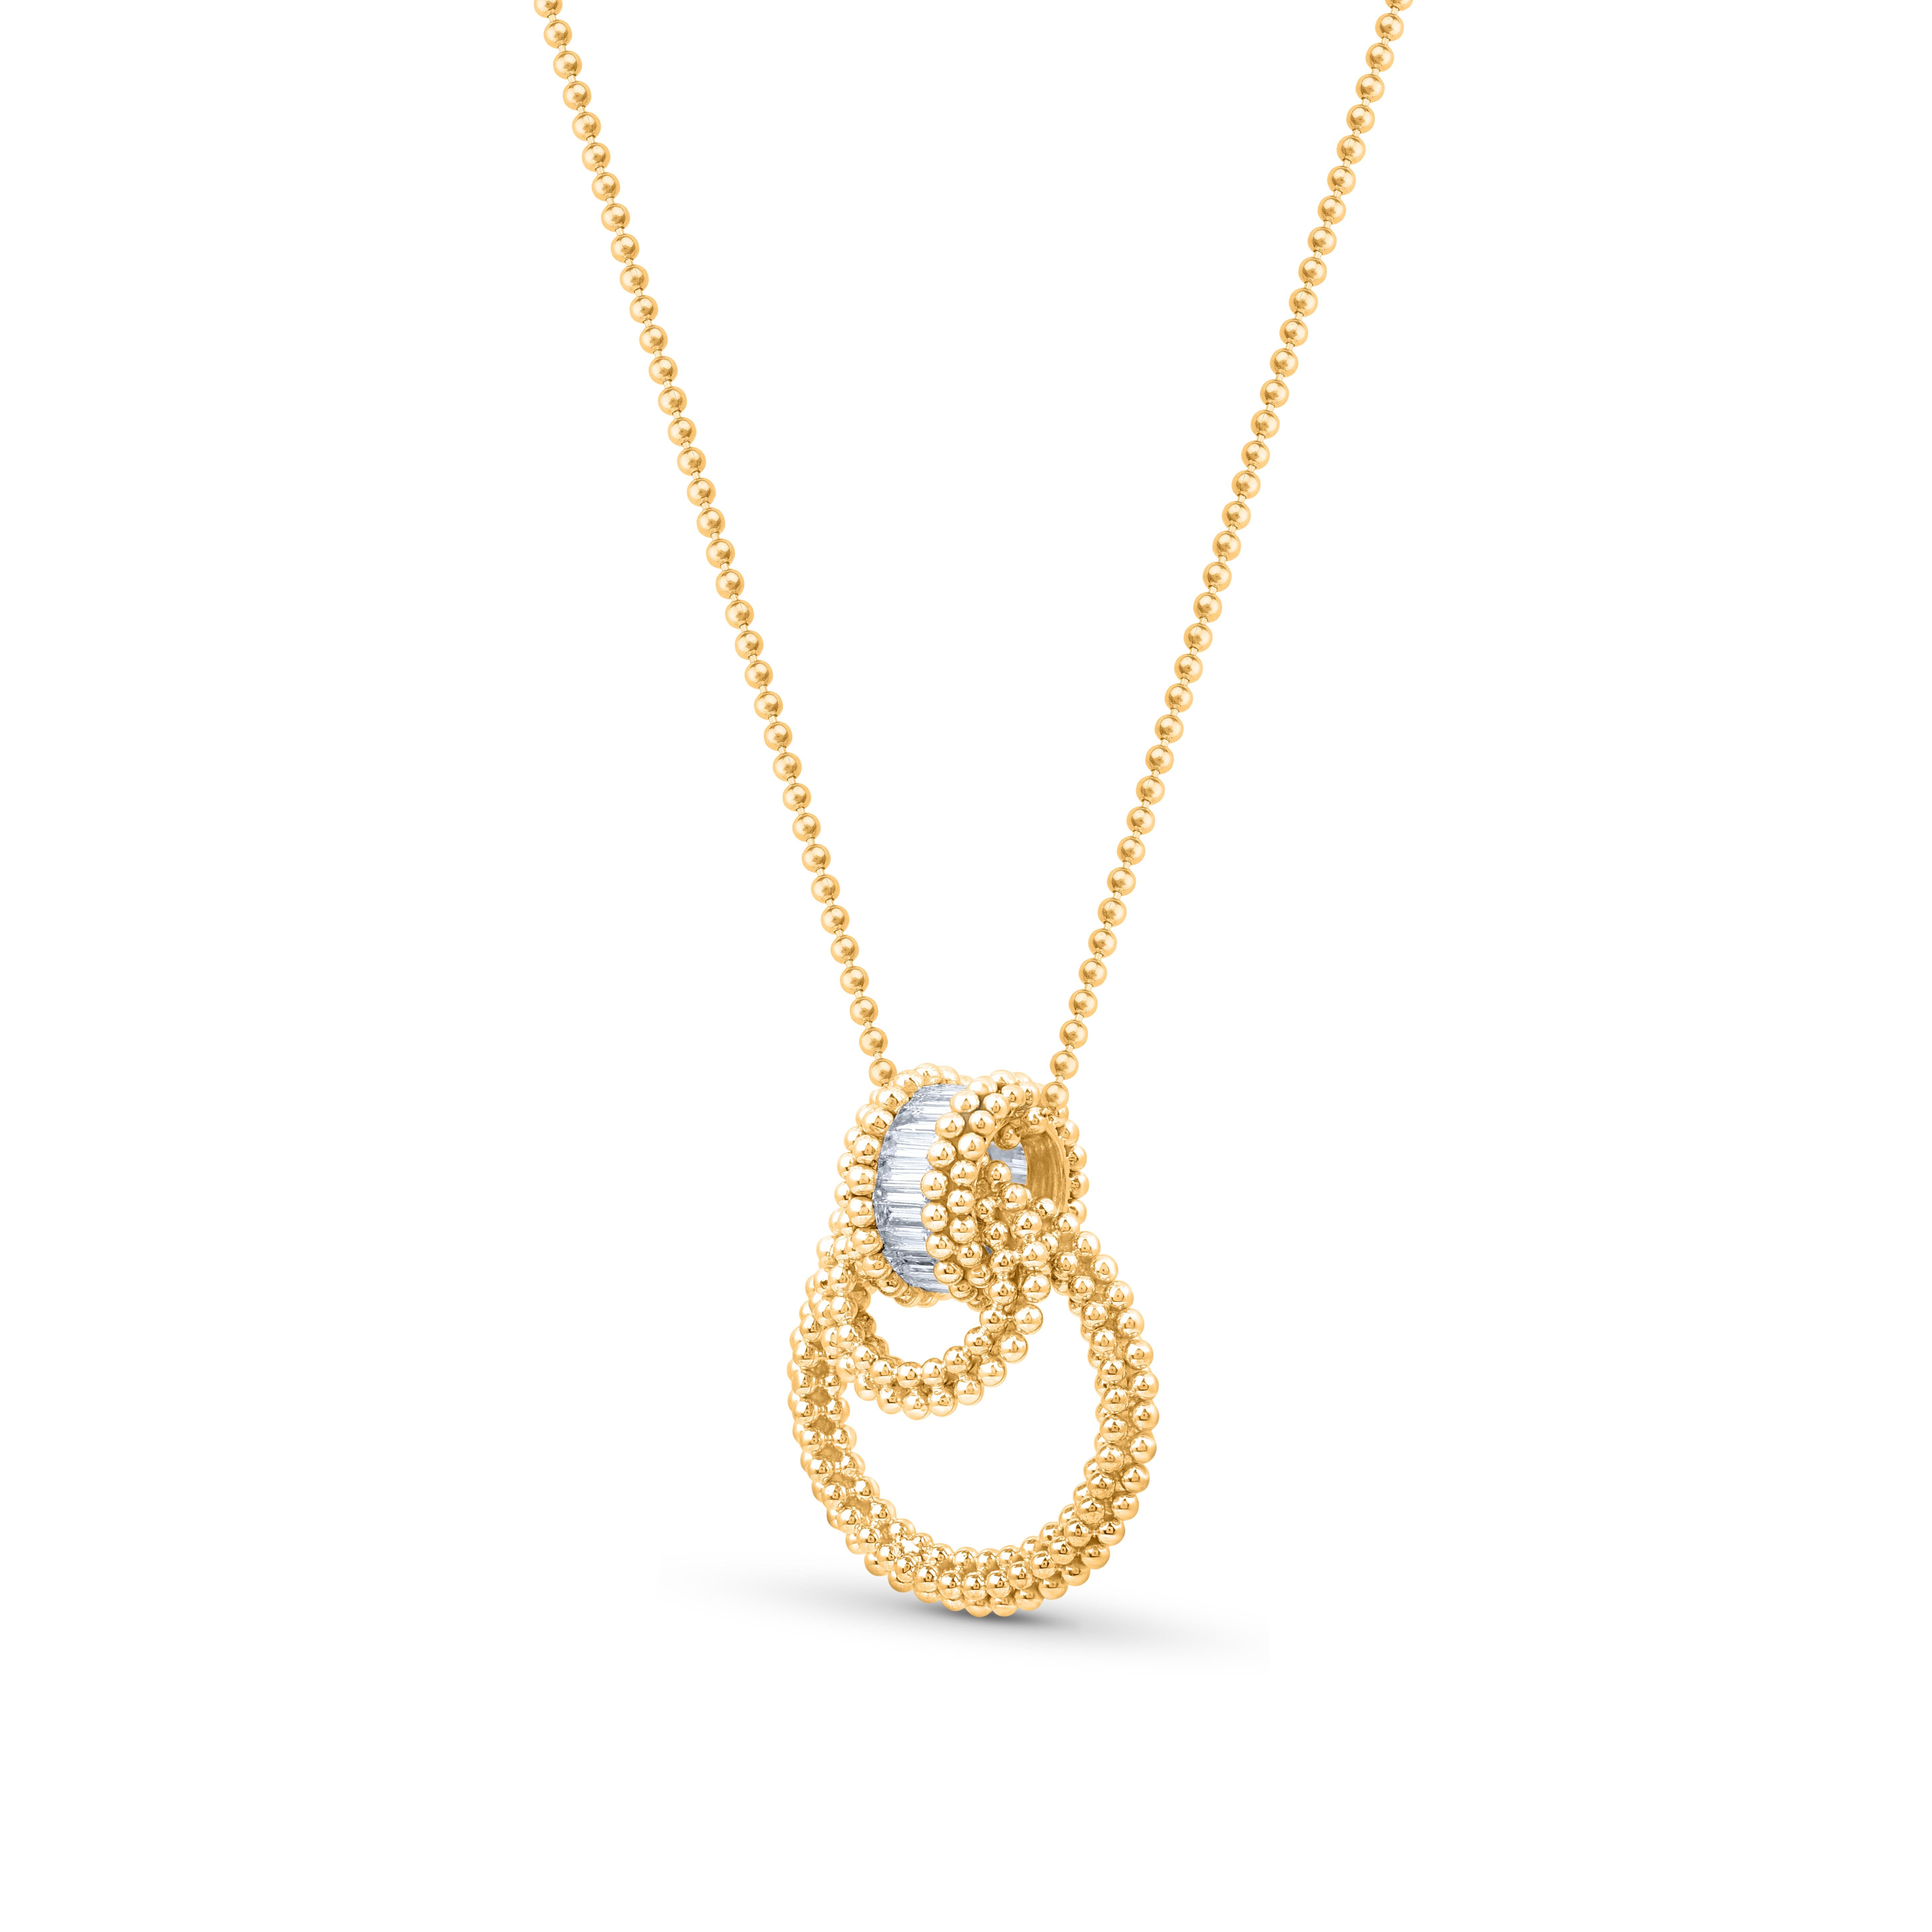 Inspired by the Journey of the sun’s rays traveling through space and time to brighten our world. An artisanal form of embroidery known as pota is recreated especially for gold using delicate hand made granulations This solitaire diamond necklace